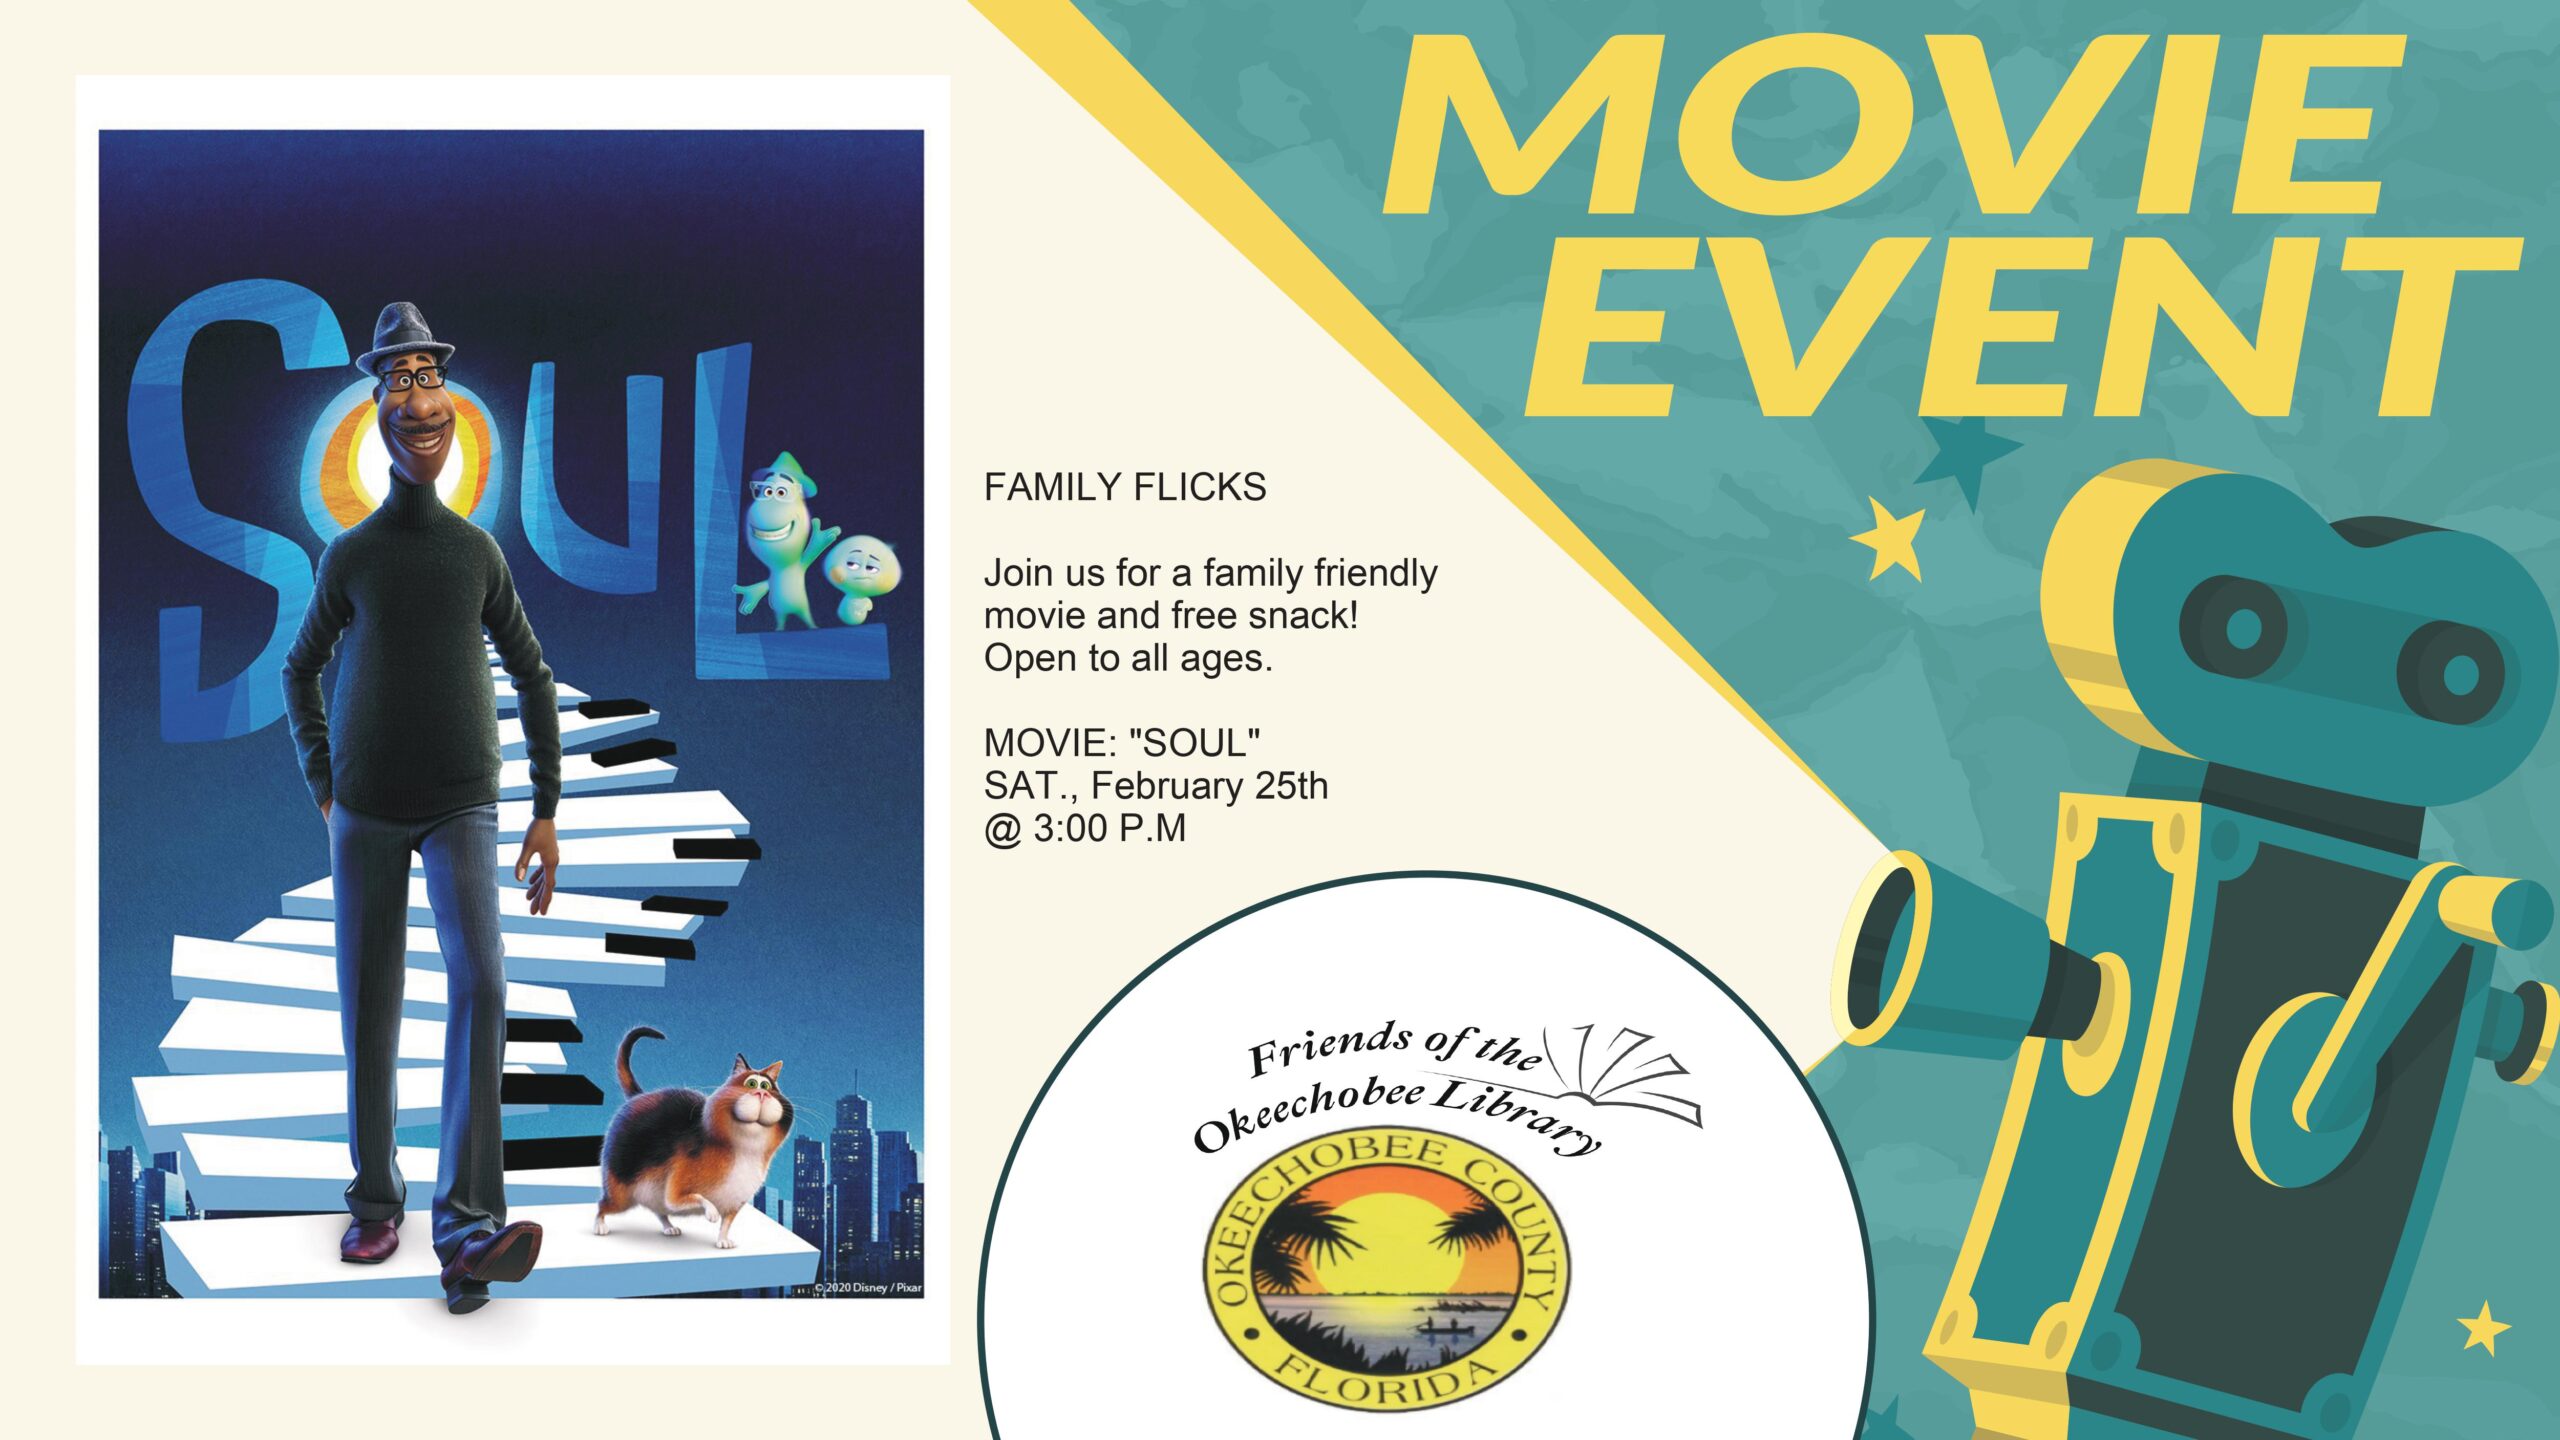 Join us for a FREE movie and a snack at the Okeechobee Library! Our Family Flicks movie event featuring 'Soul' will be held on Saturday, February 25th @ 3:00 p.m.